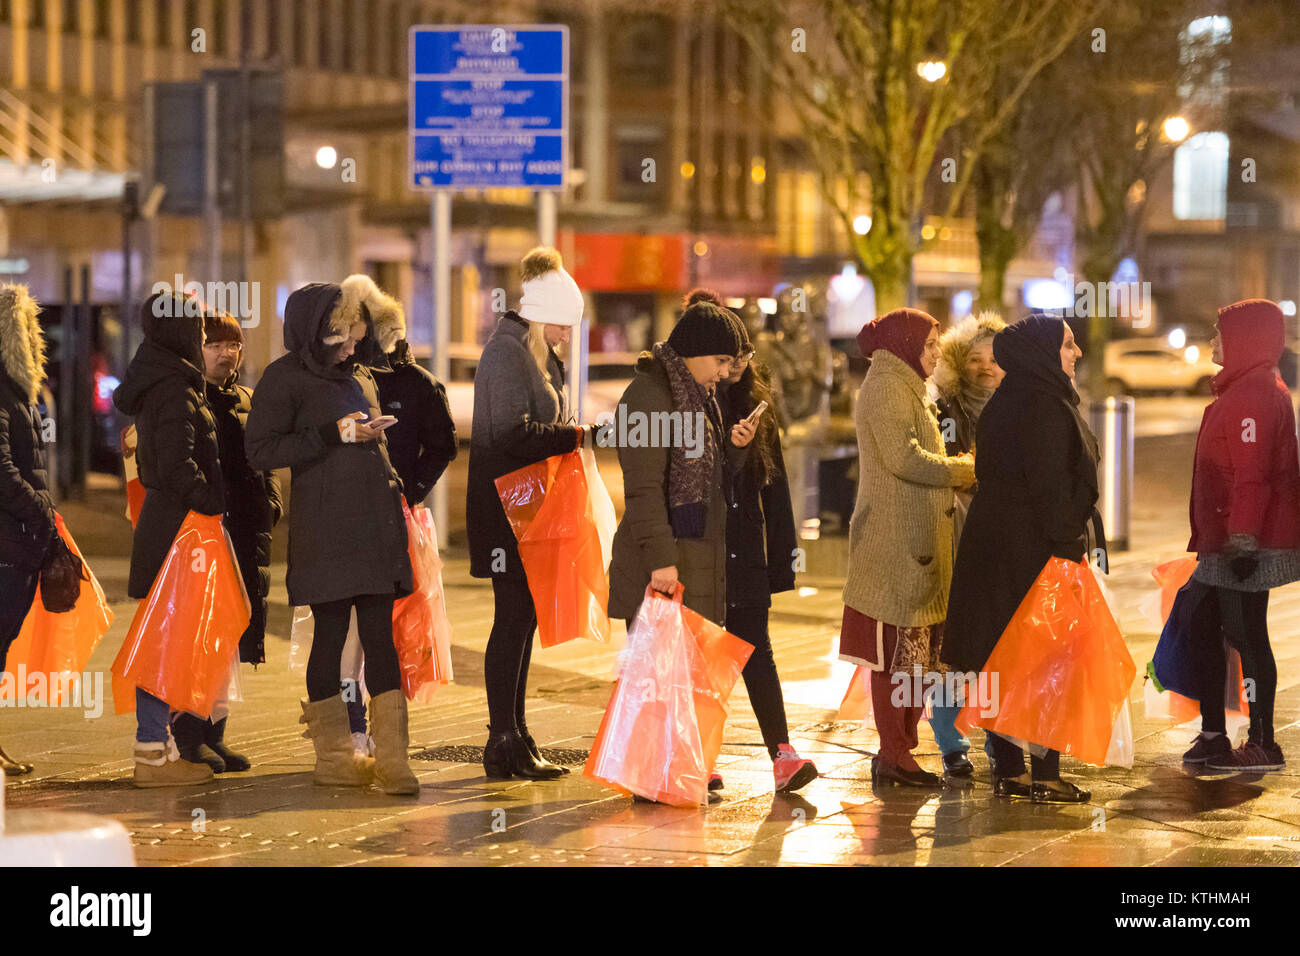 Shoppers at the Next Boxing Day sale at the Next store on Queen Street in Cardiff, Wales. Shoppers queued from 1am for the sale with the store opening its doors to customers at 6am this morning. Stock Photo